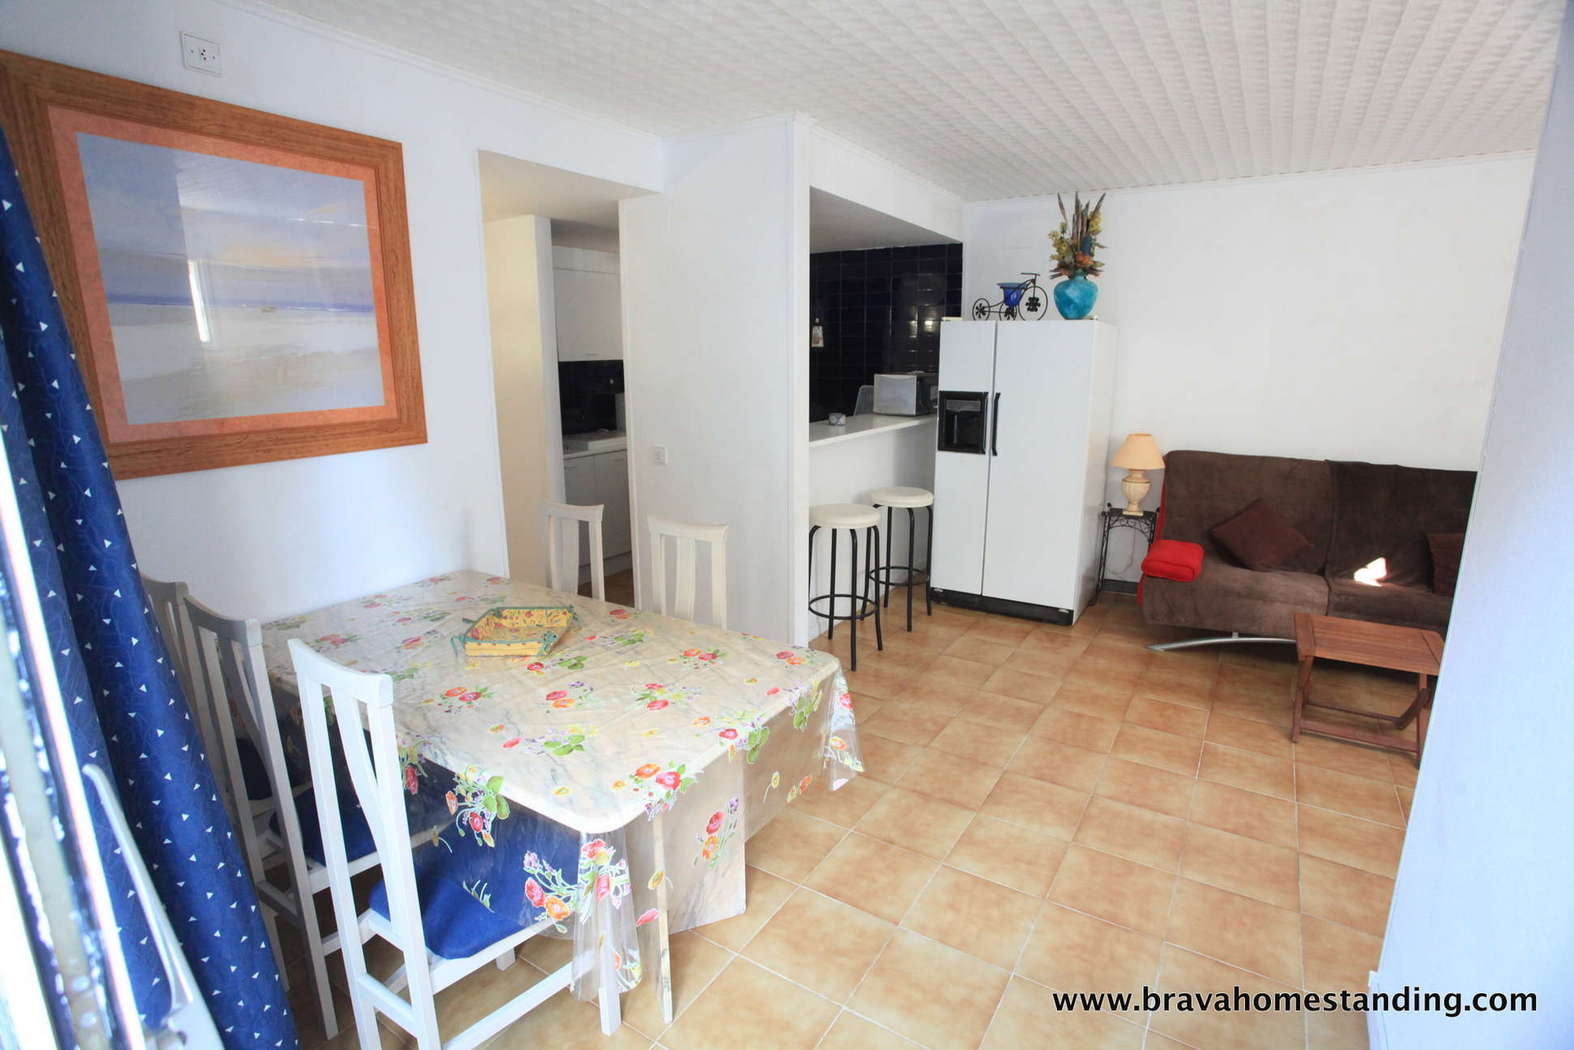 Apartment situated at 20 meters from the beach of Rosas for sale